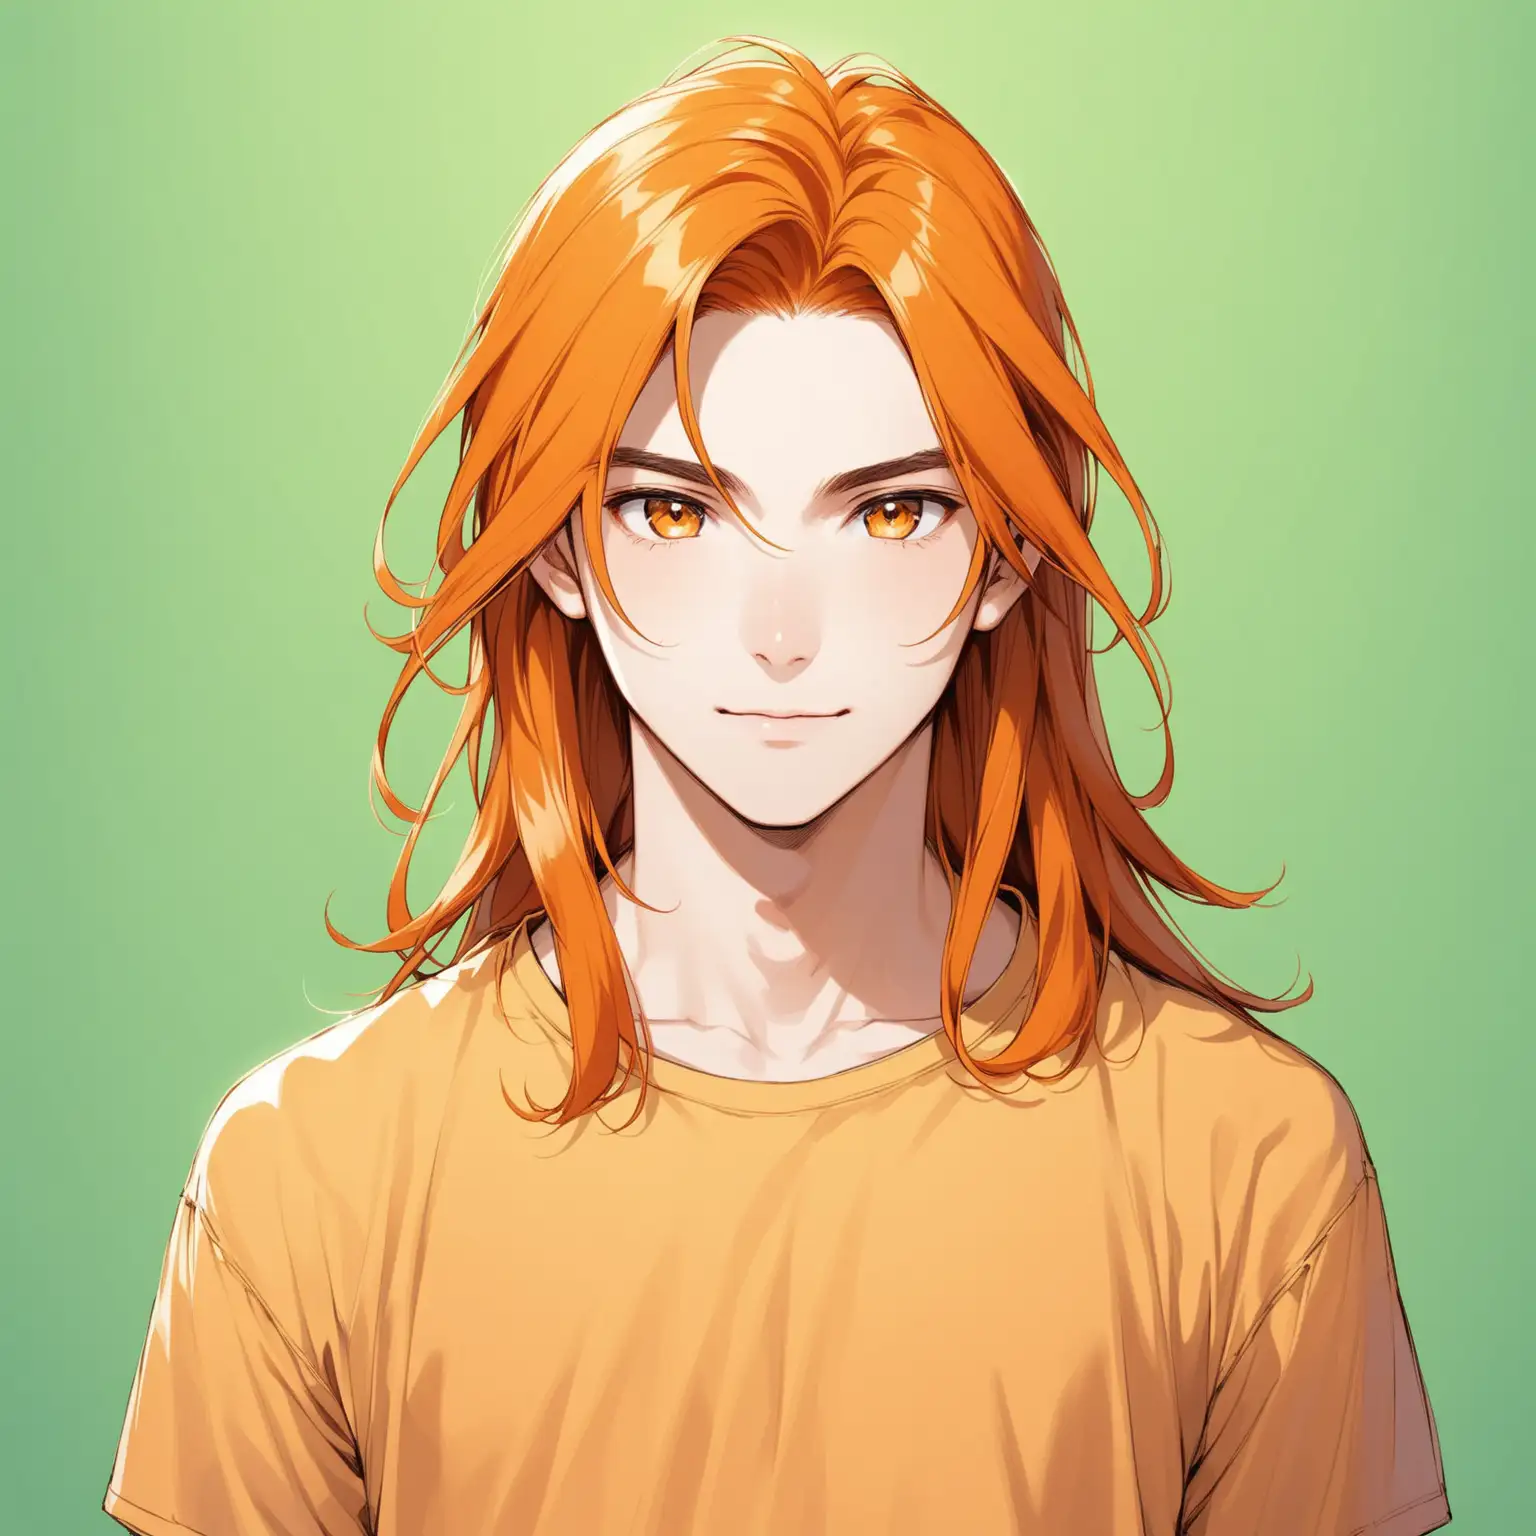 Vibrant Portrait of an OrangeHaired Youth Captivating Beauty and Confidence